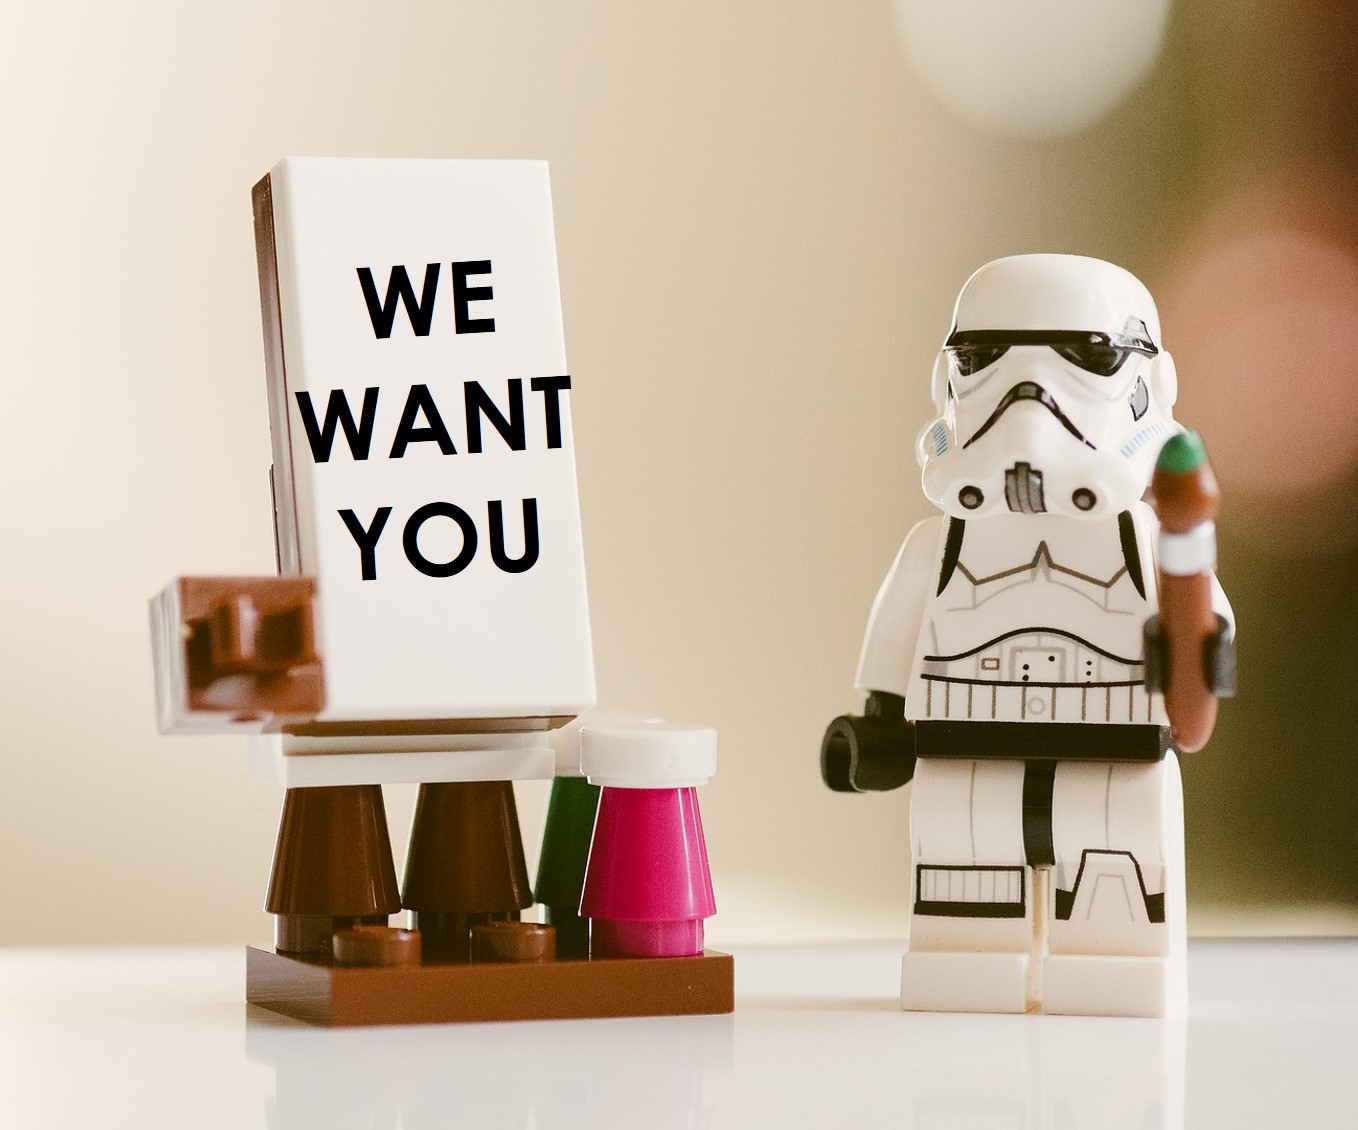 Star Wars Lego figure with sign "We want you".